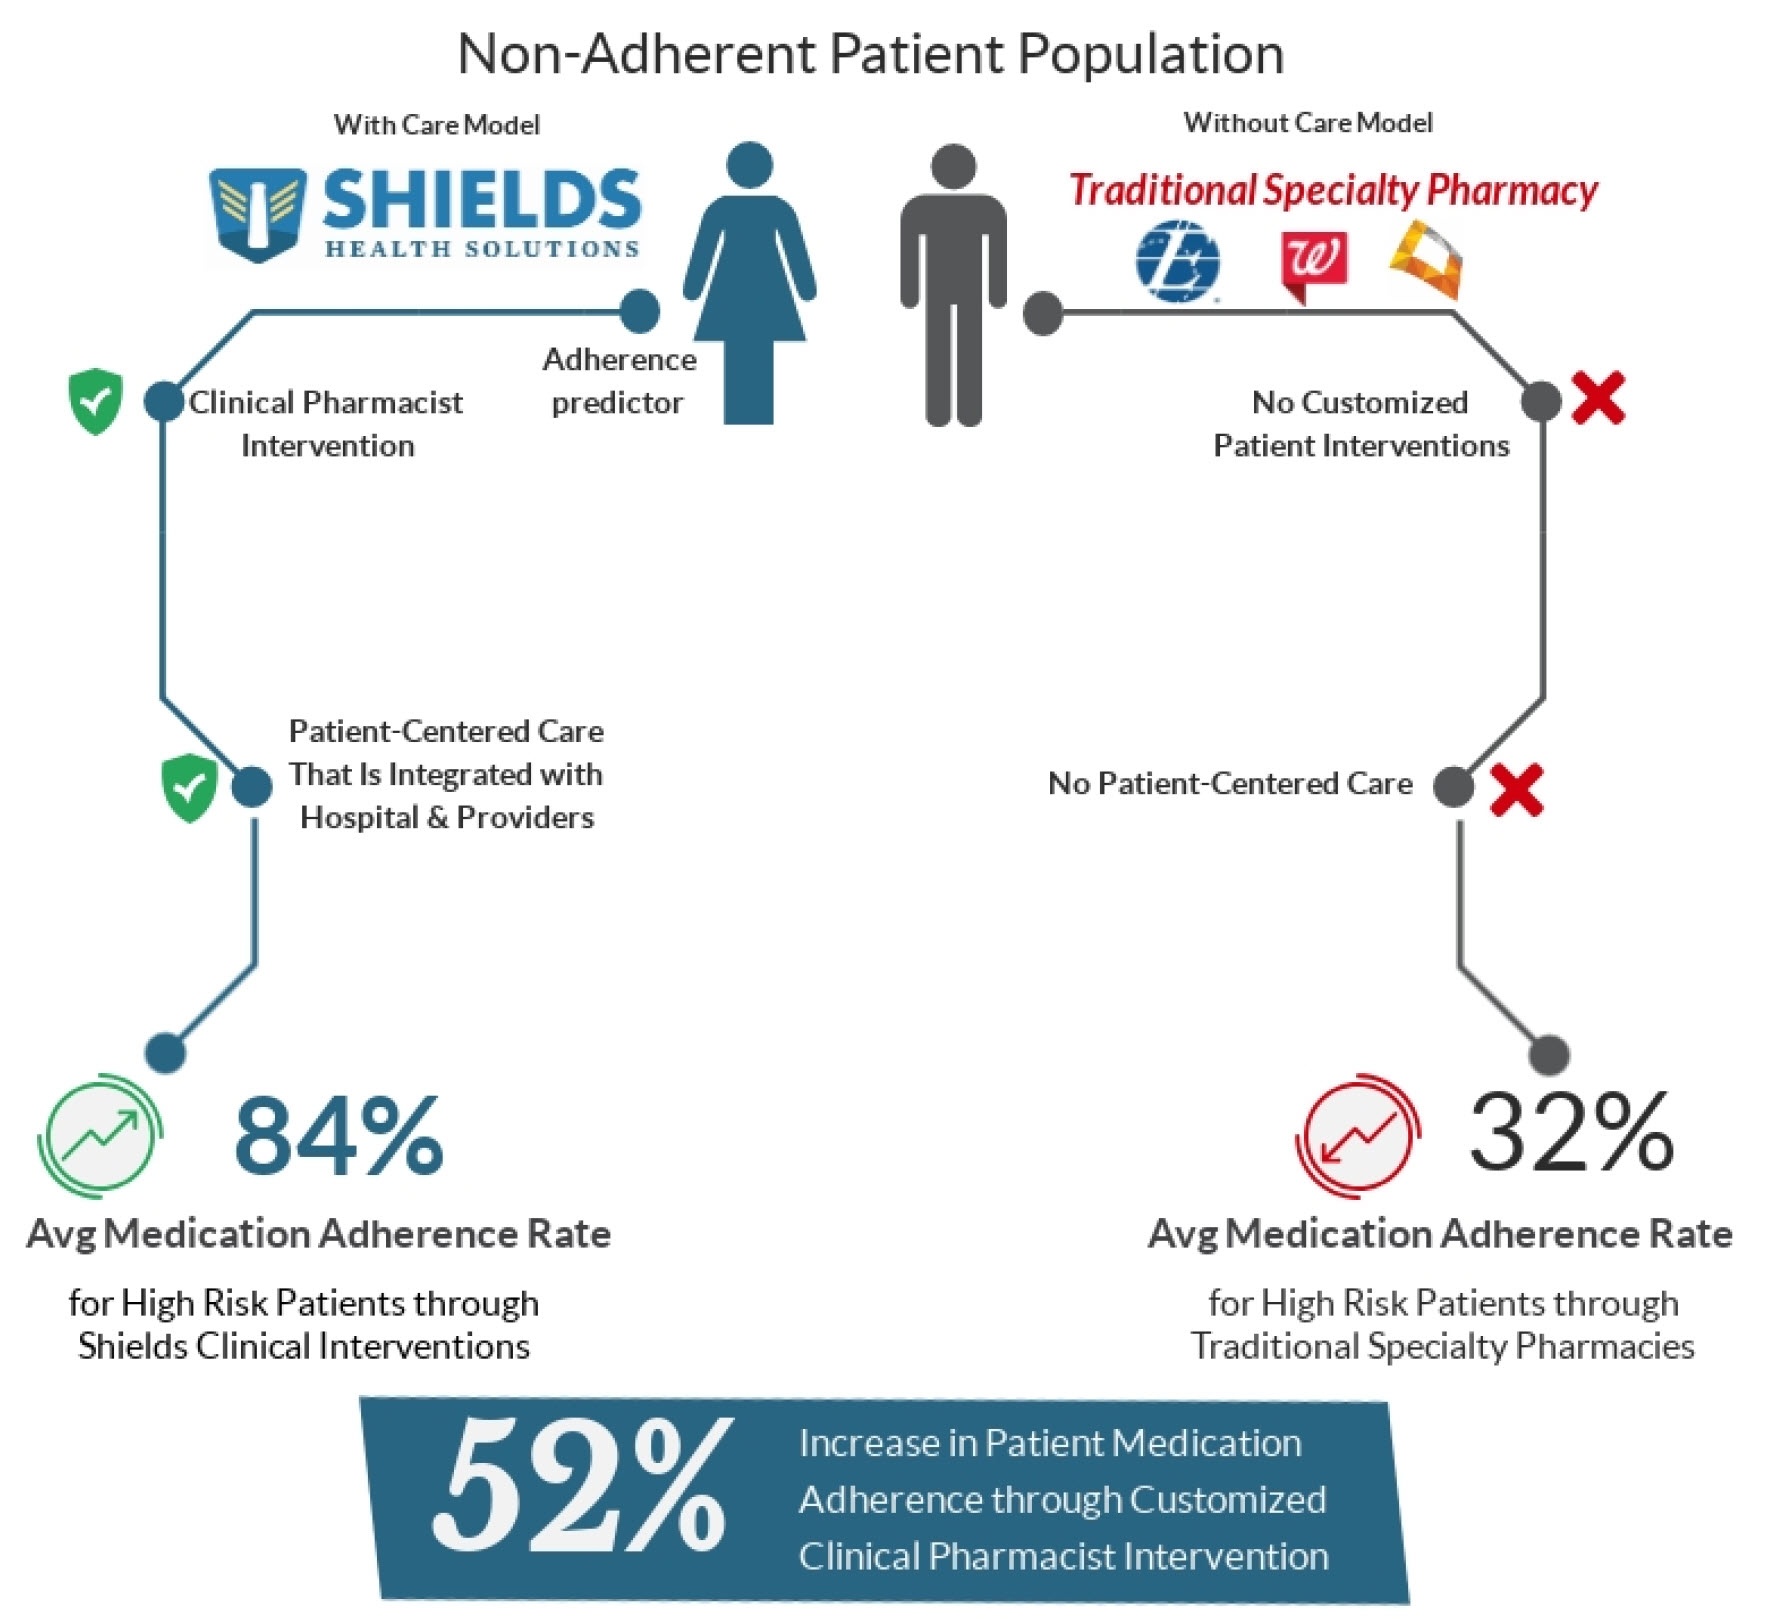 solving non-adherence in high risk patients - graphic 9-6-18.jpg